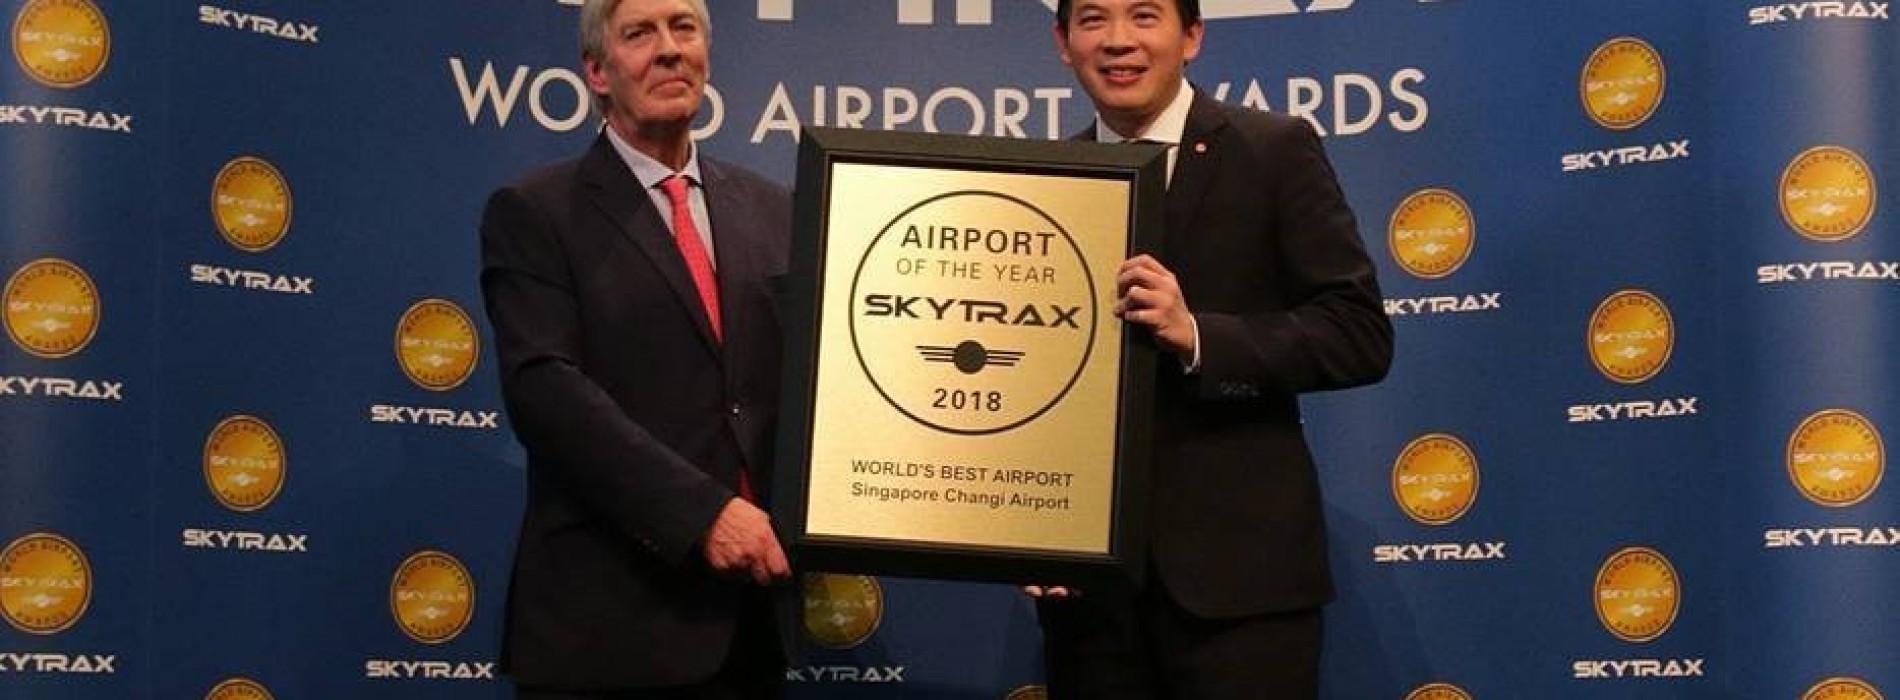 Changi Airport is named the world’s best airport for the sixth consecutive year